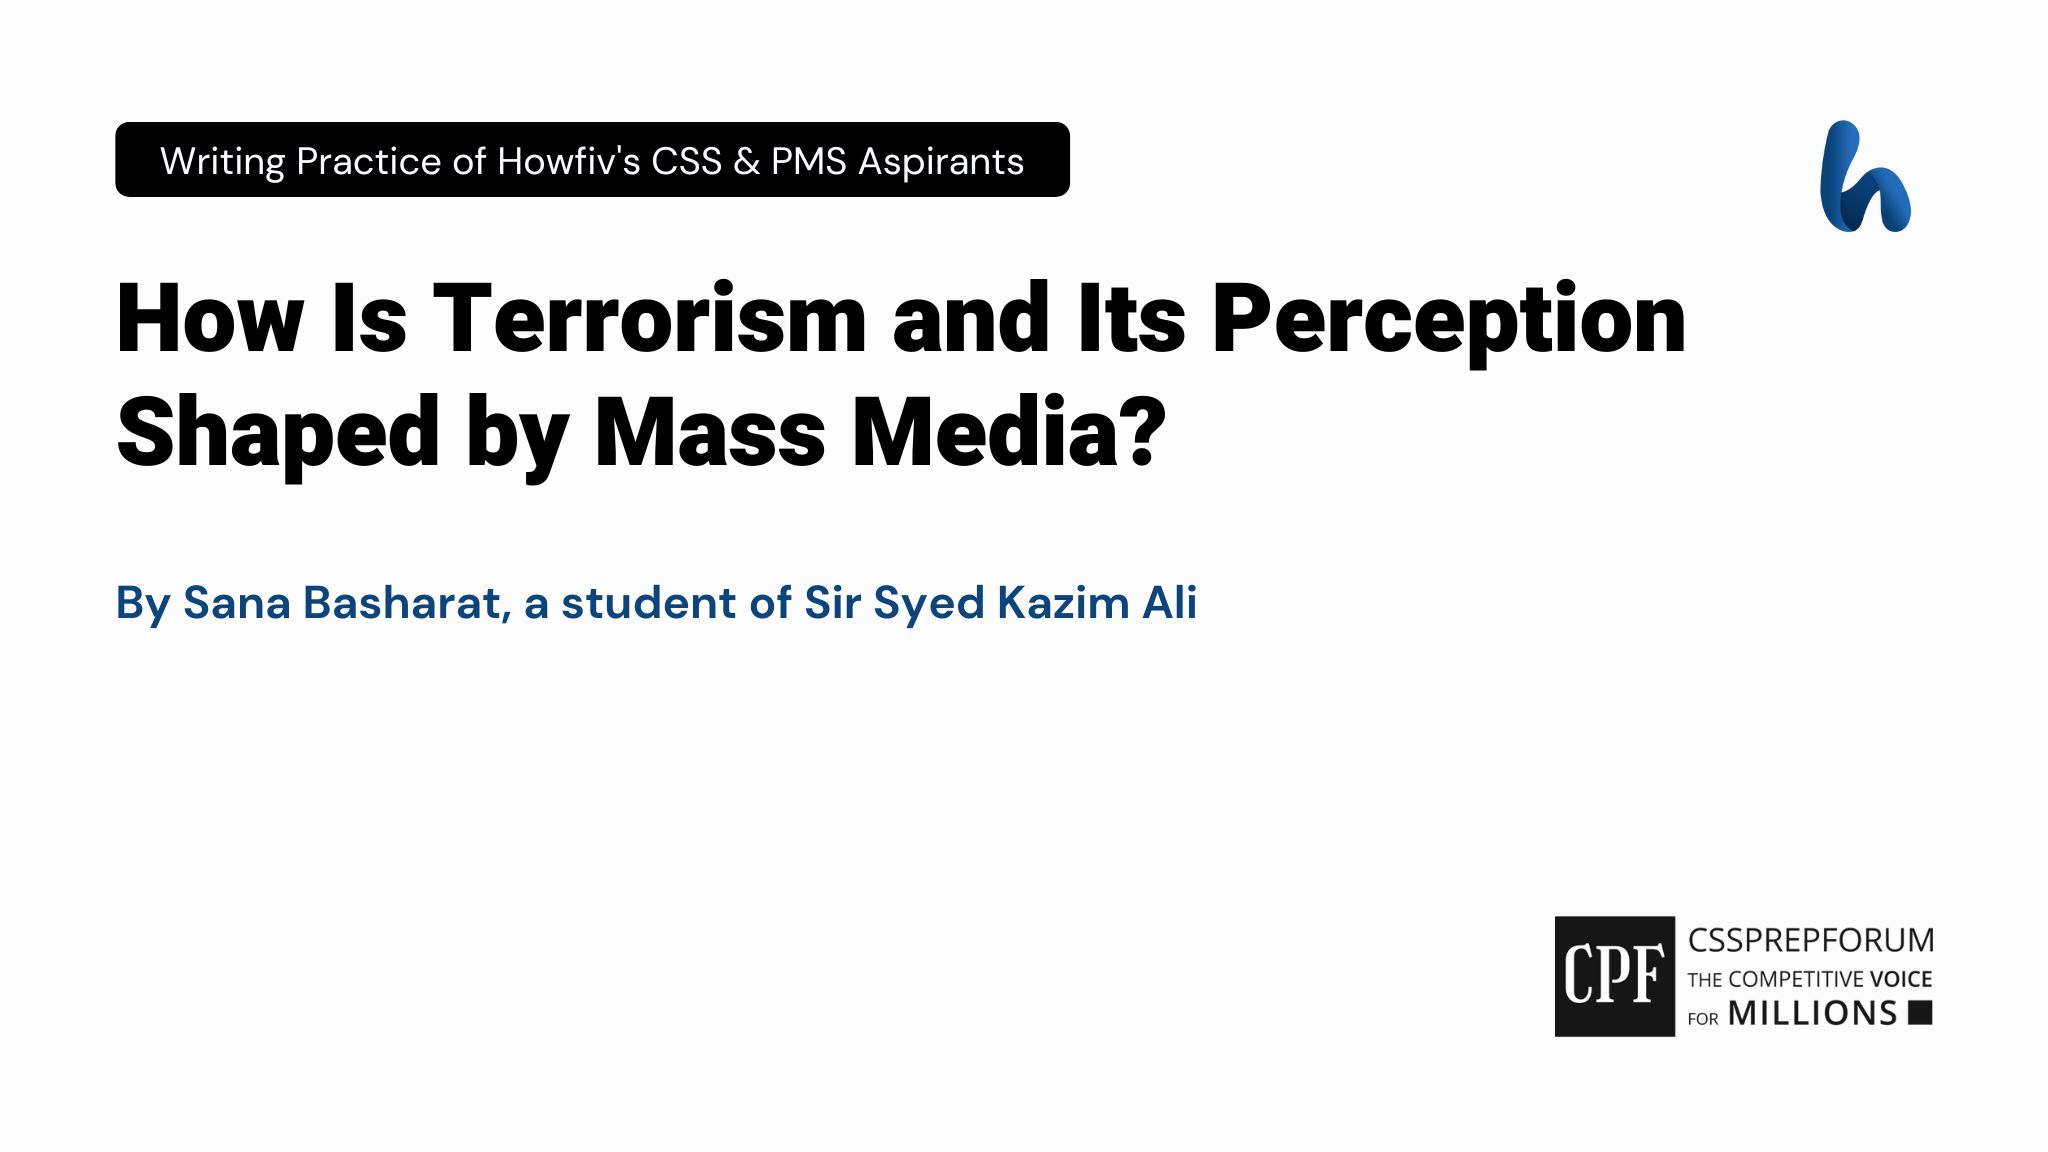 How Is Terrorism and Its Perception Shaped by Mass Media?